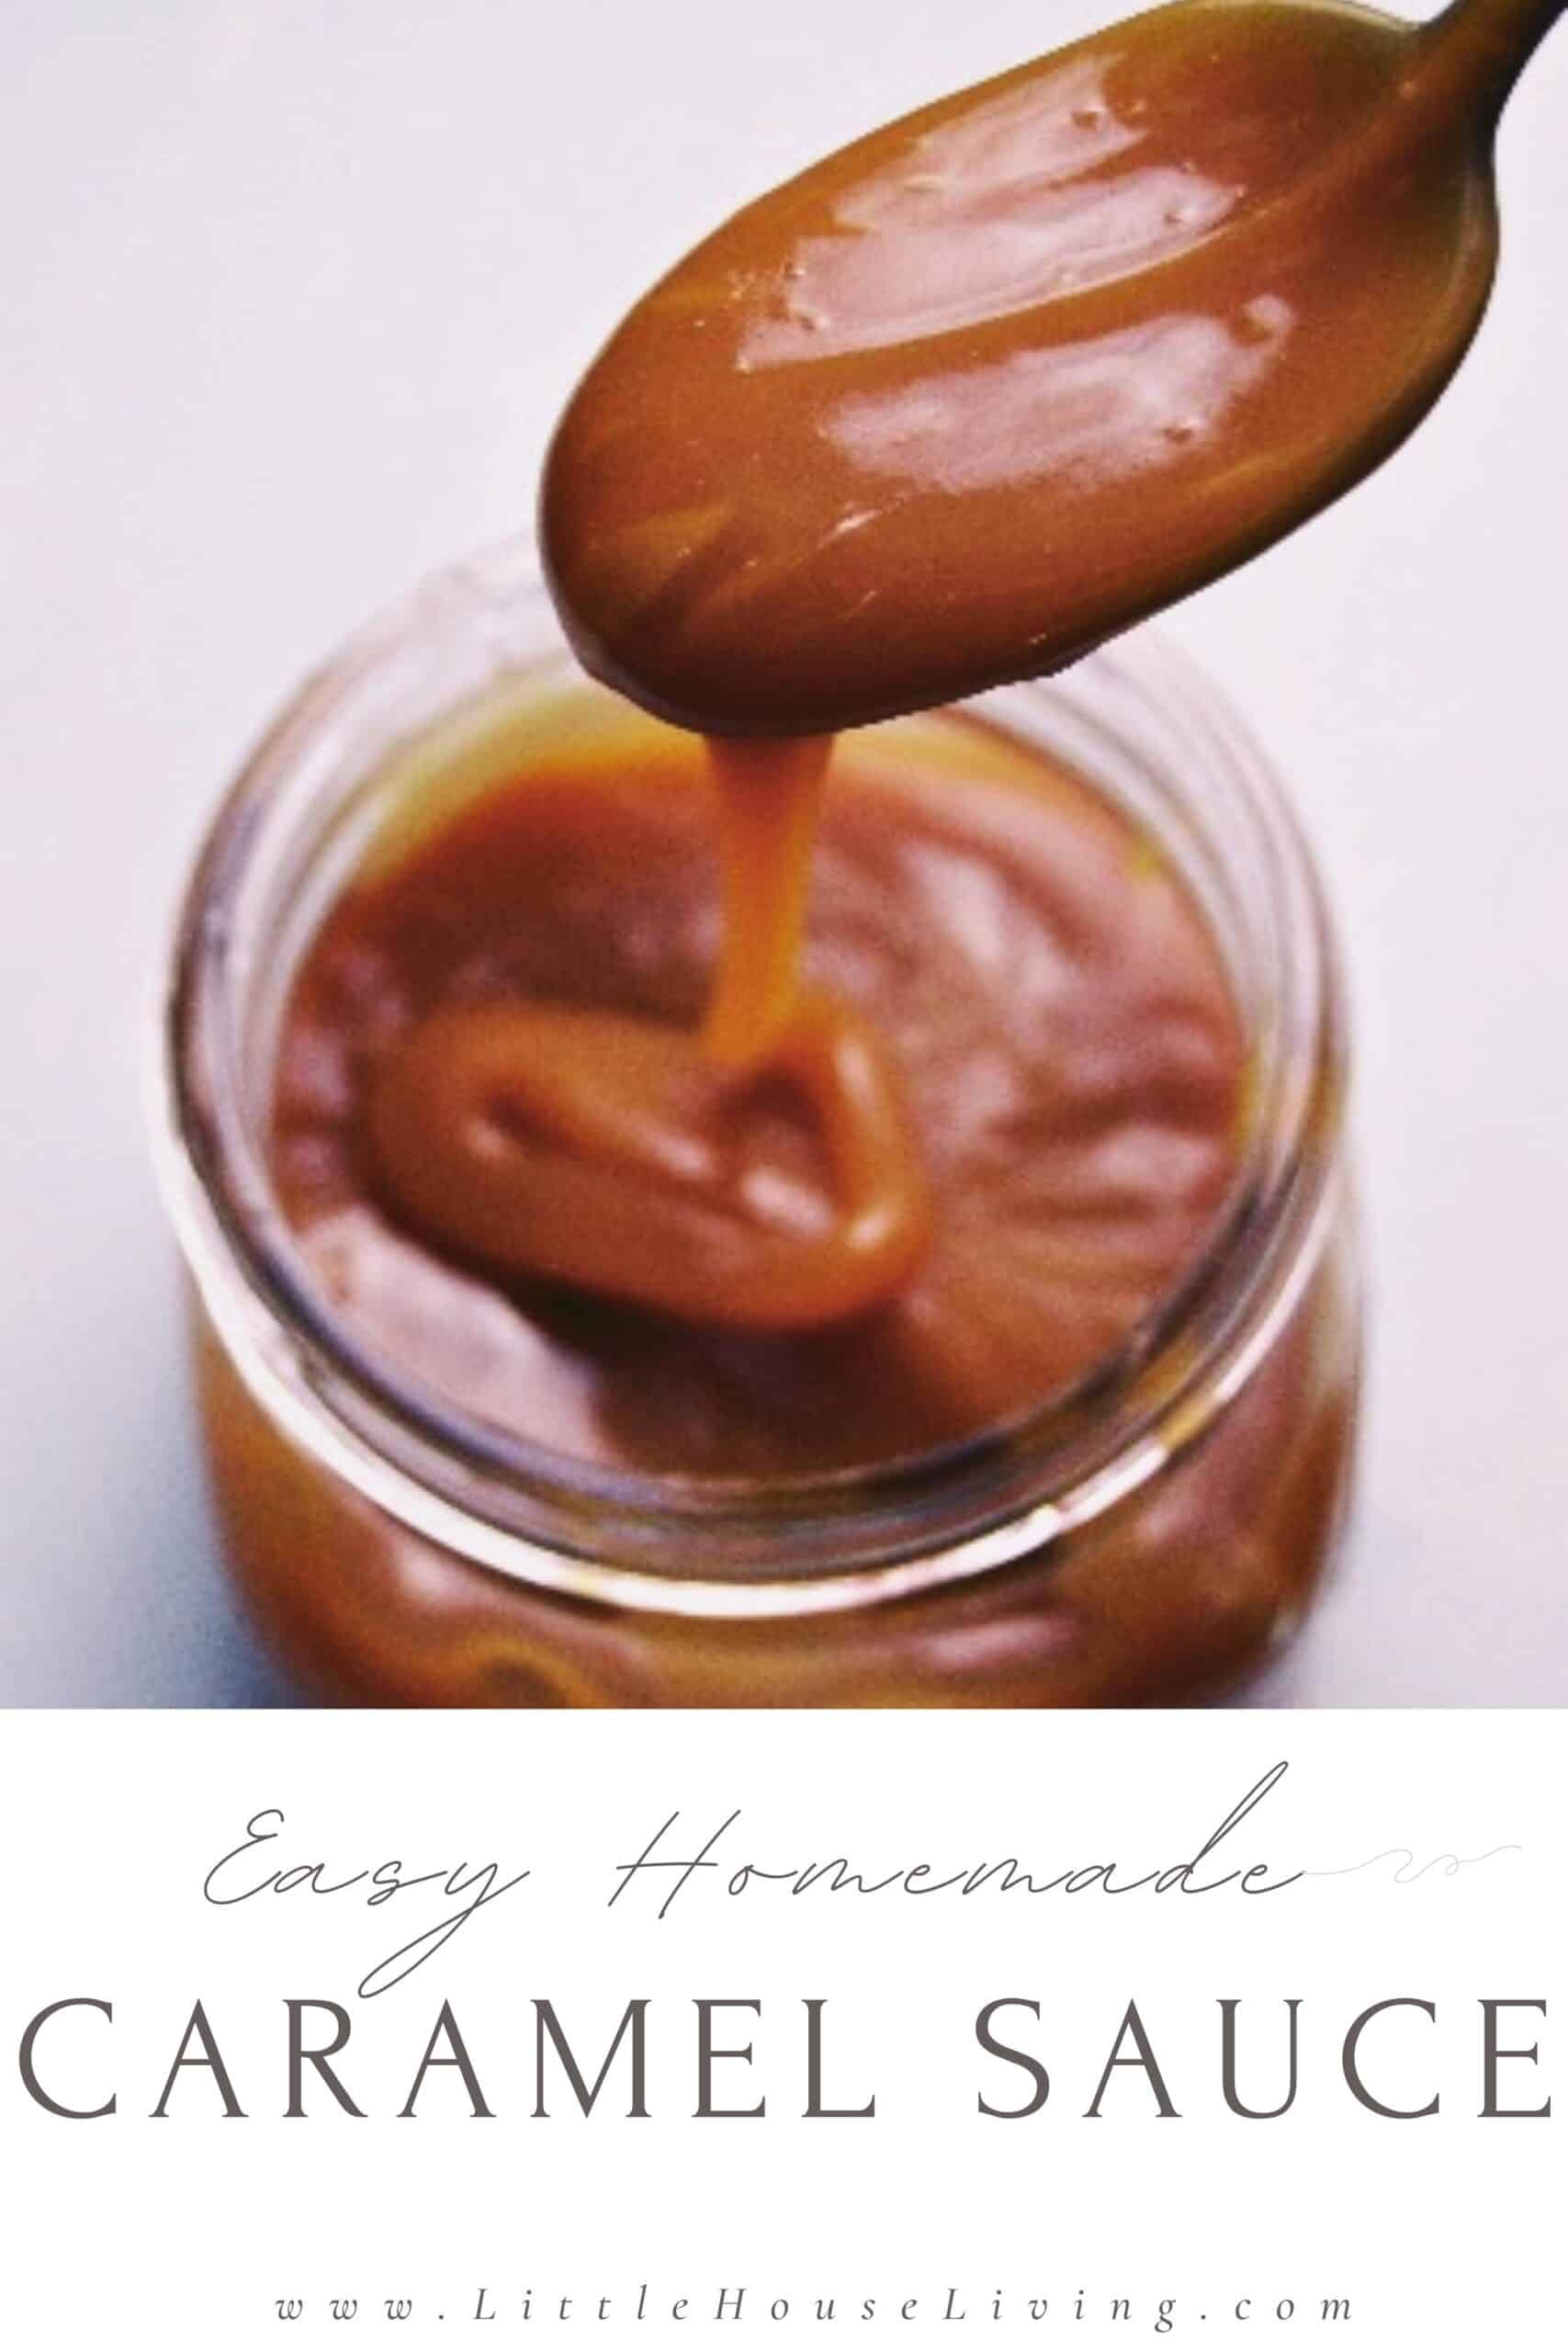 How to make an easy homemade caramel sauce with cream and butter, no corn syrup. Perfect caramel sauce for apples or other dessert toppings.